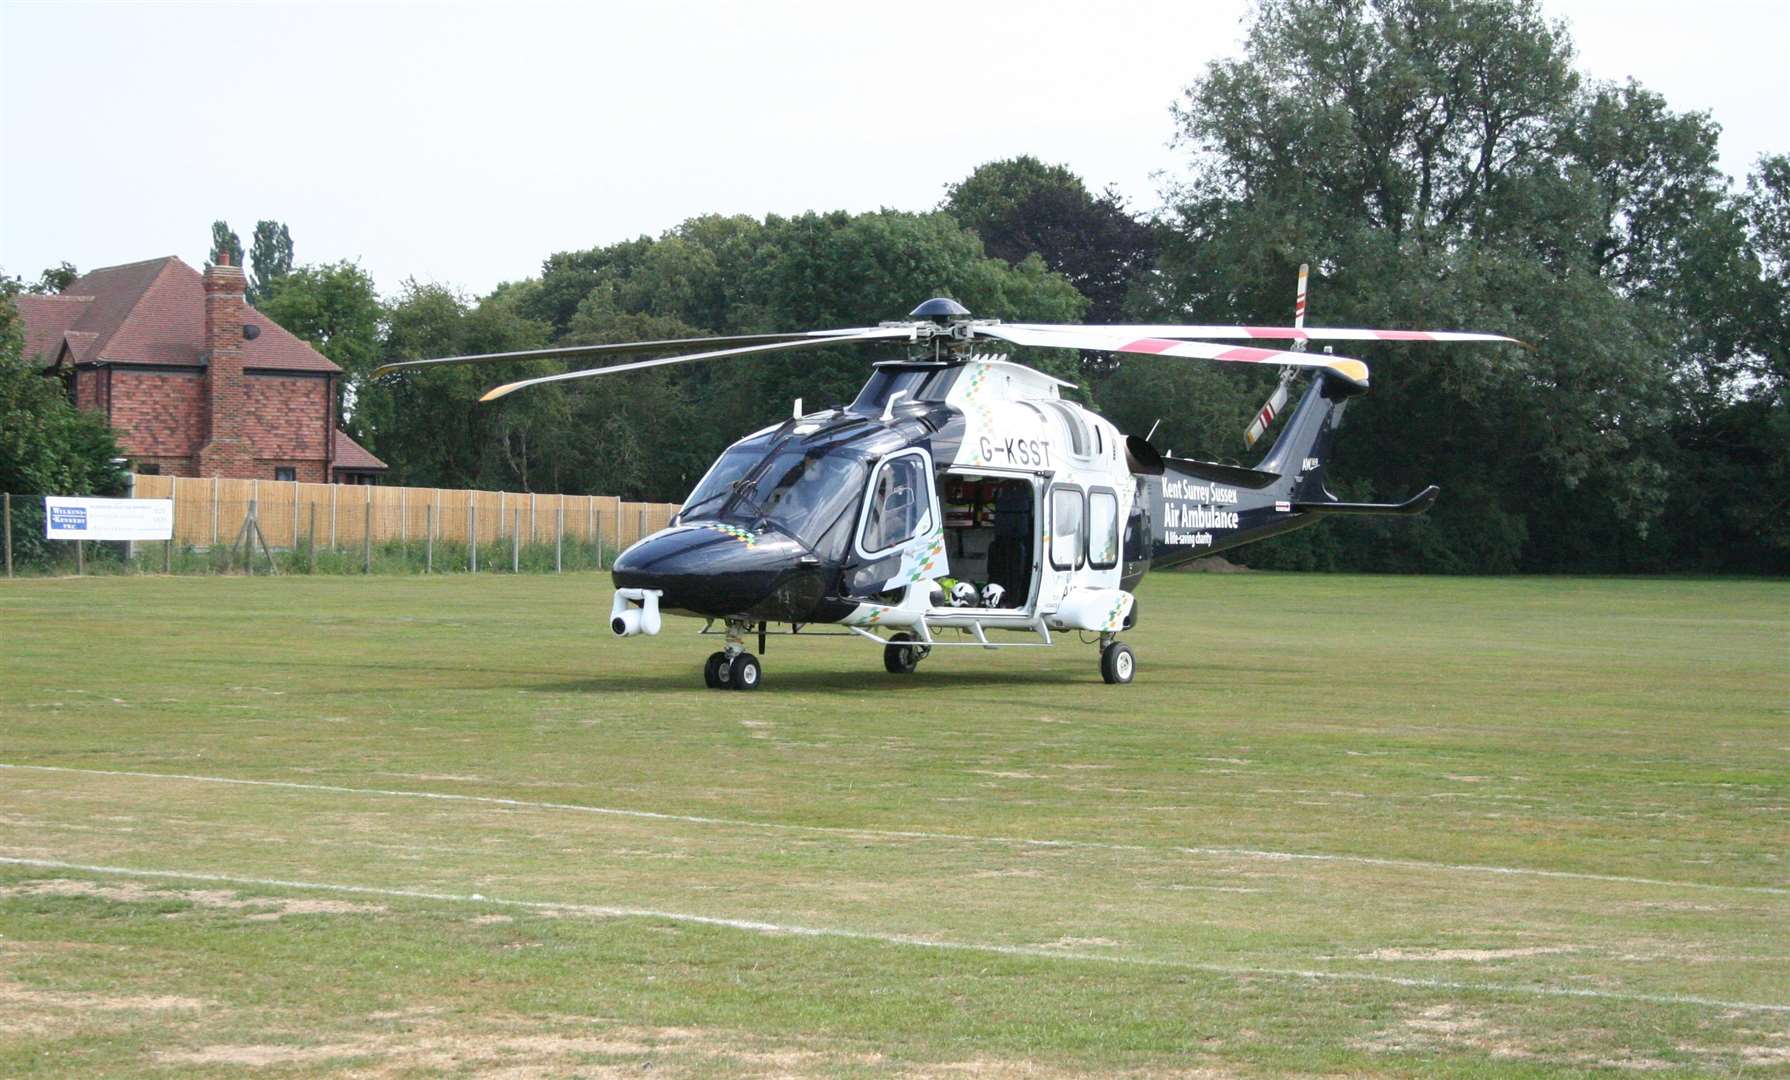 The air ambulance on the cricket club ground